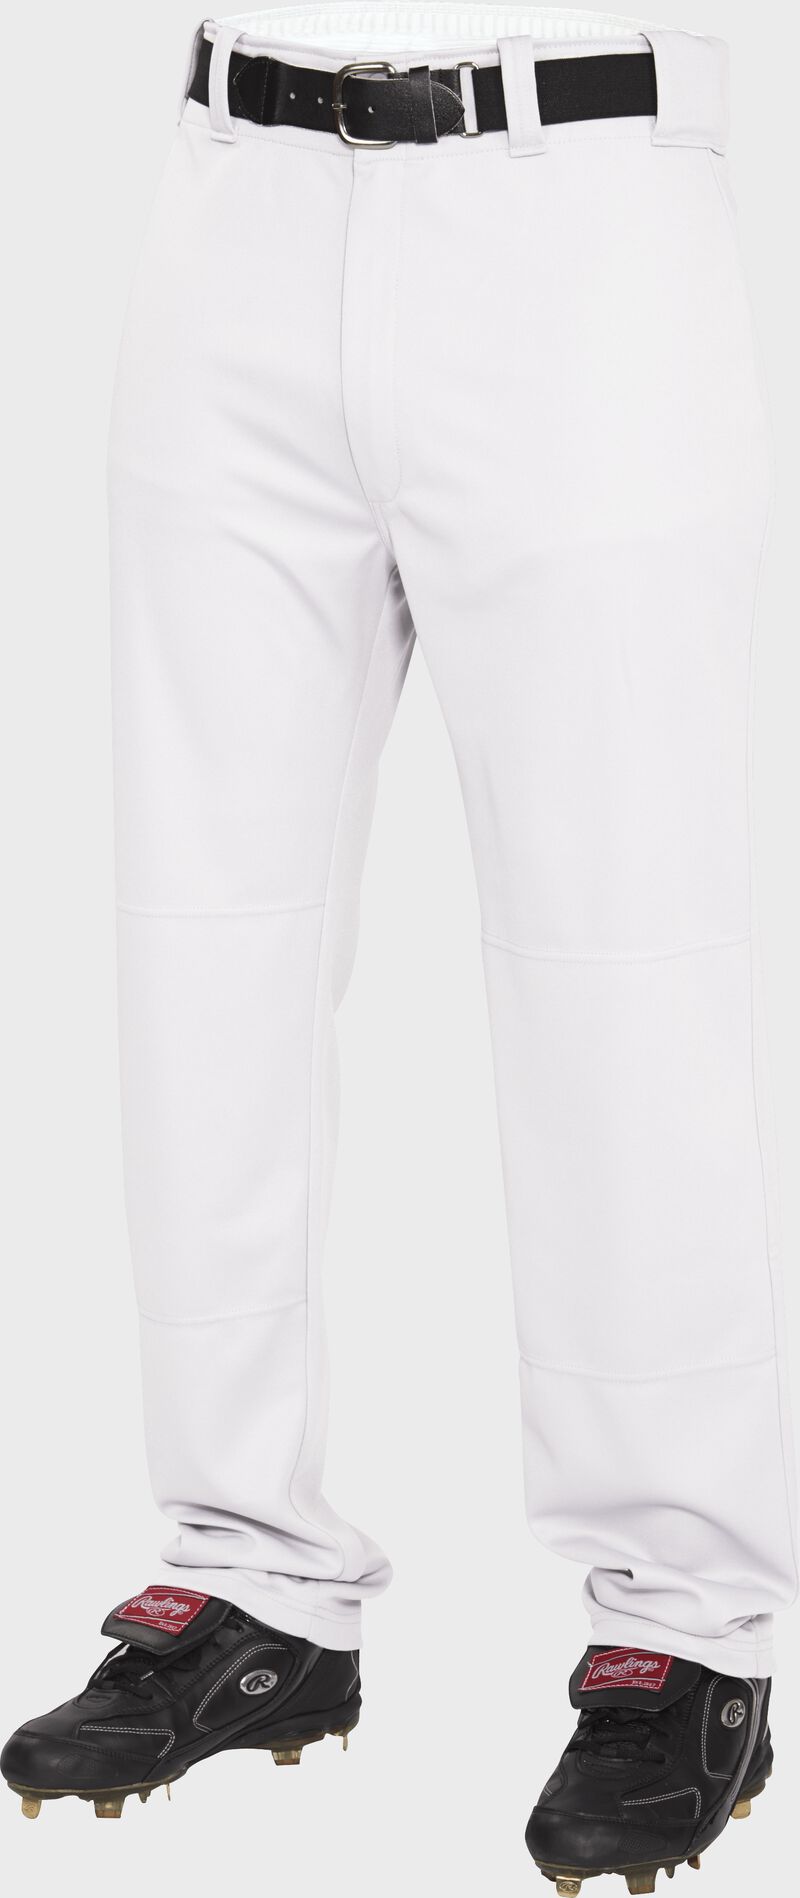 White semi-relaxed baseball pants with a black belt and black cleats - SKU: MODBP31SR-W